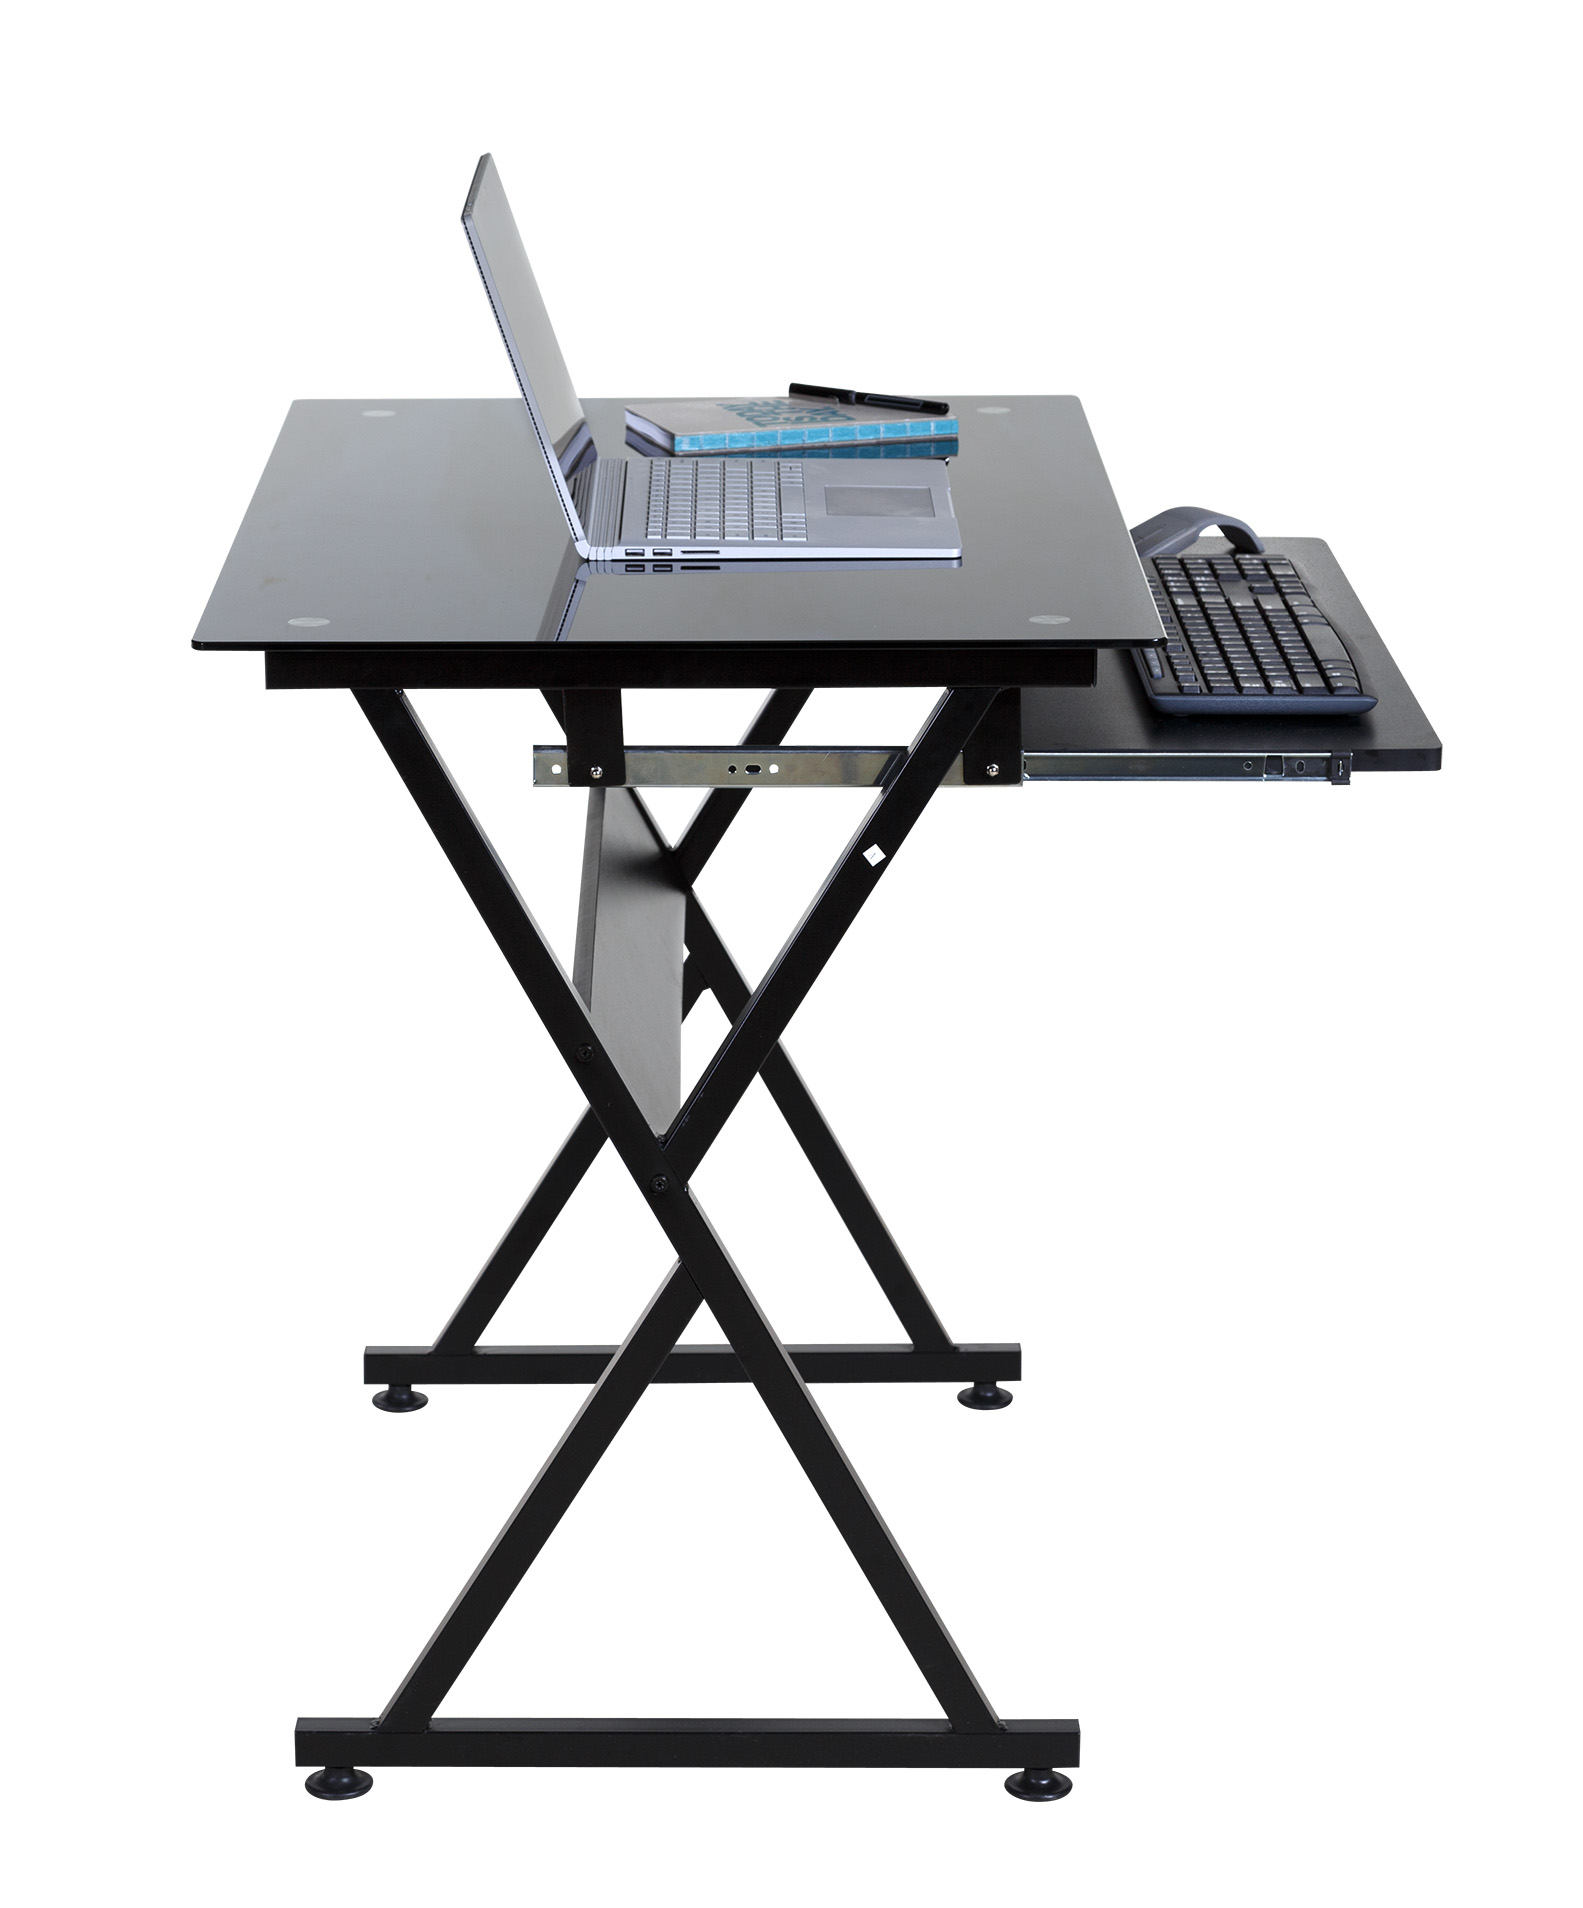 OneSpace 50-JN1205 Ultramodern Glass Computer Desk, with Pull-Out Keyboard Tray, Black - image 5 of 9